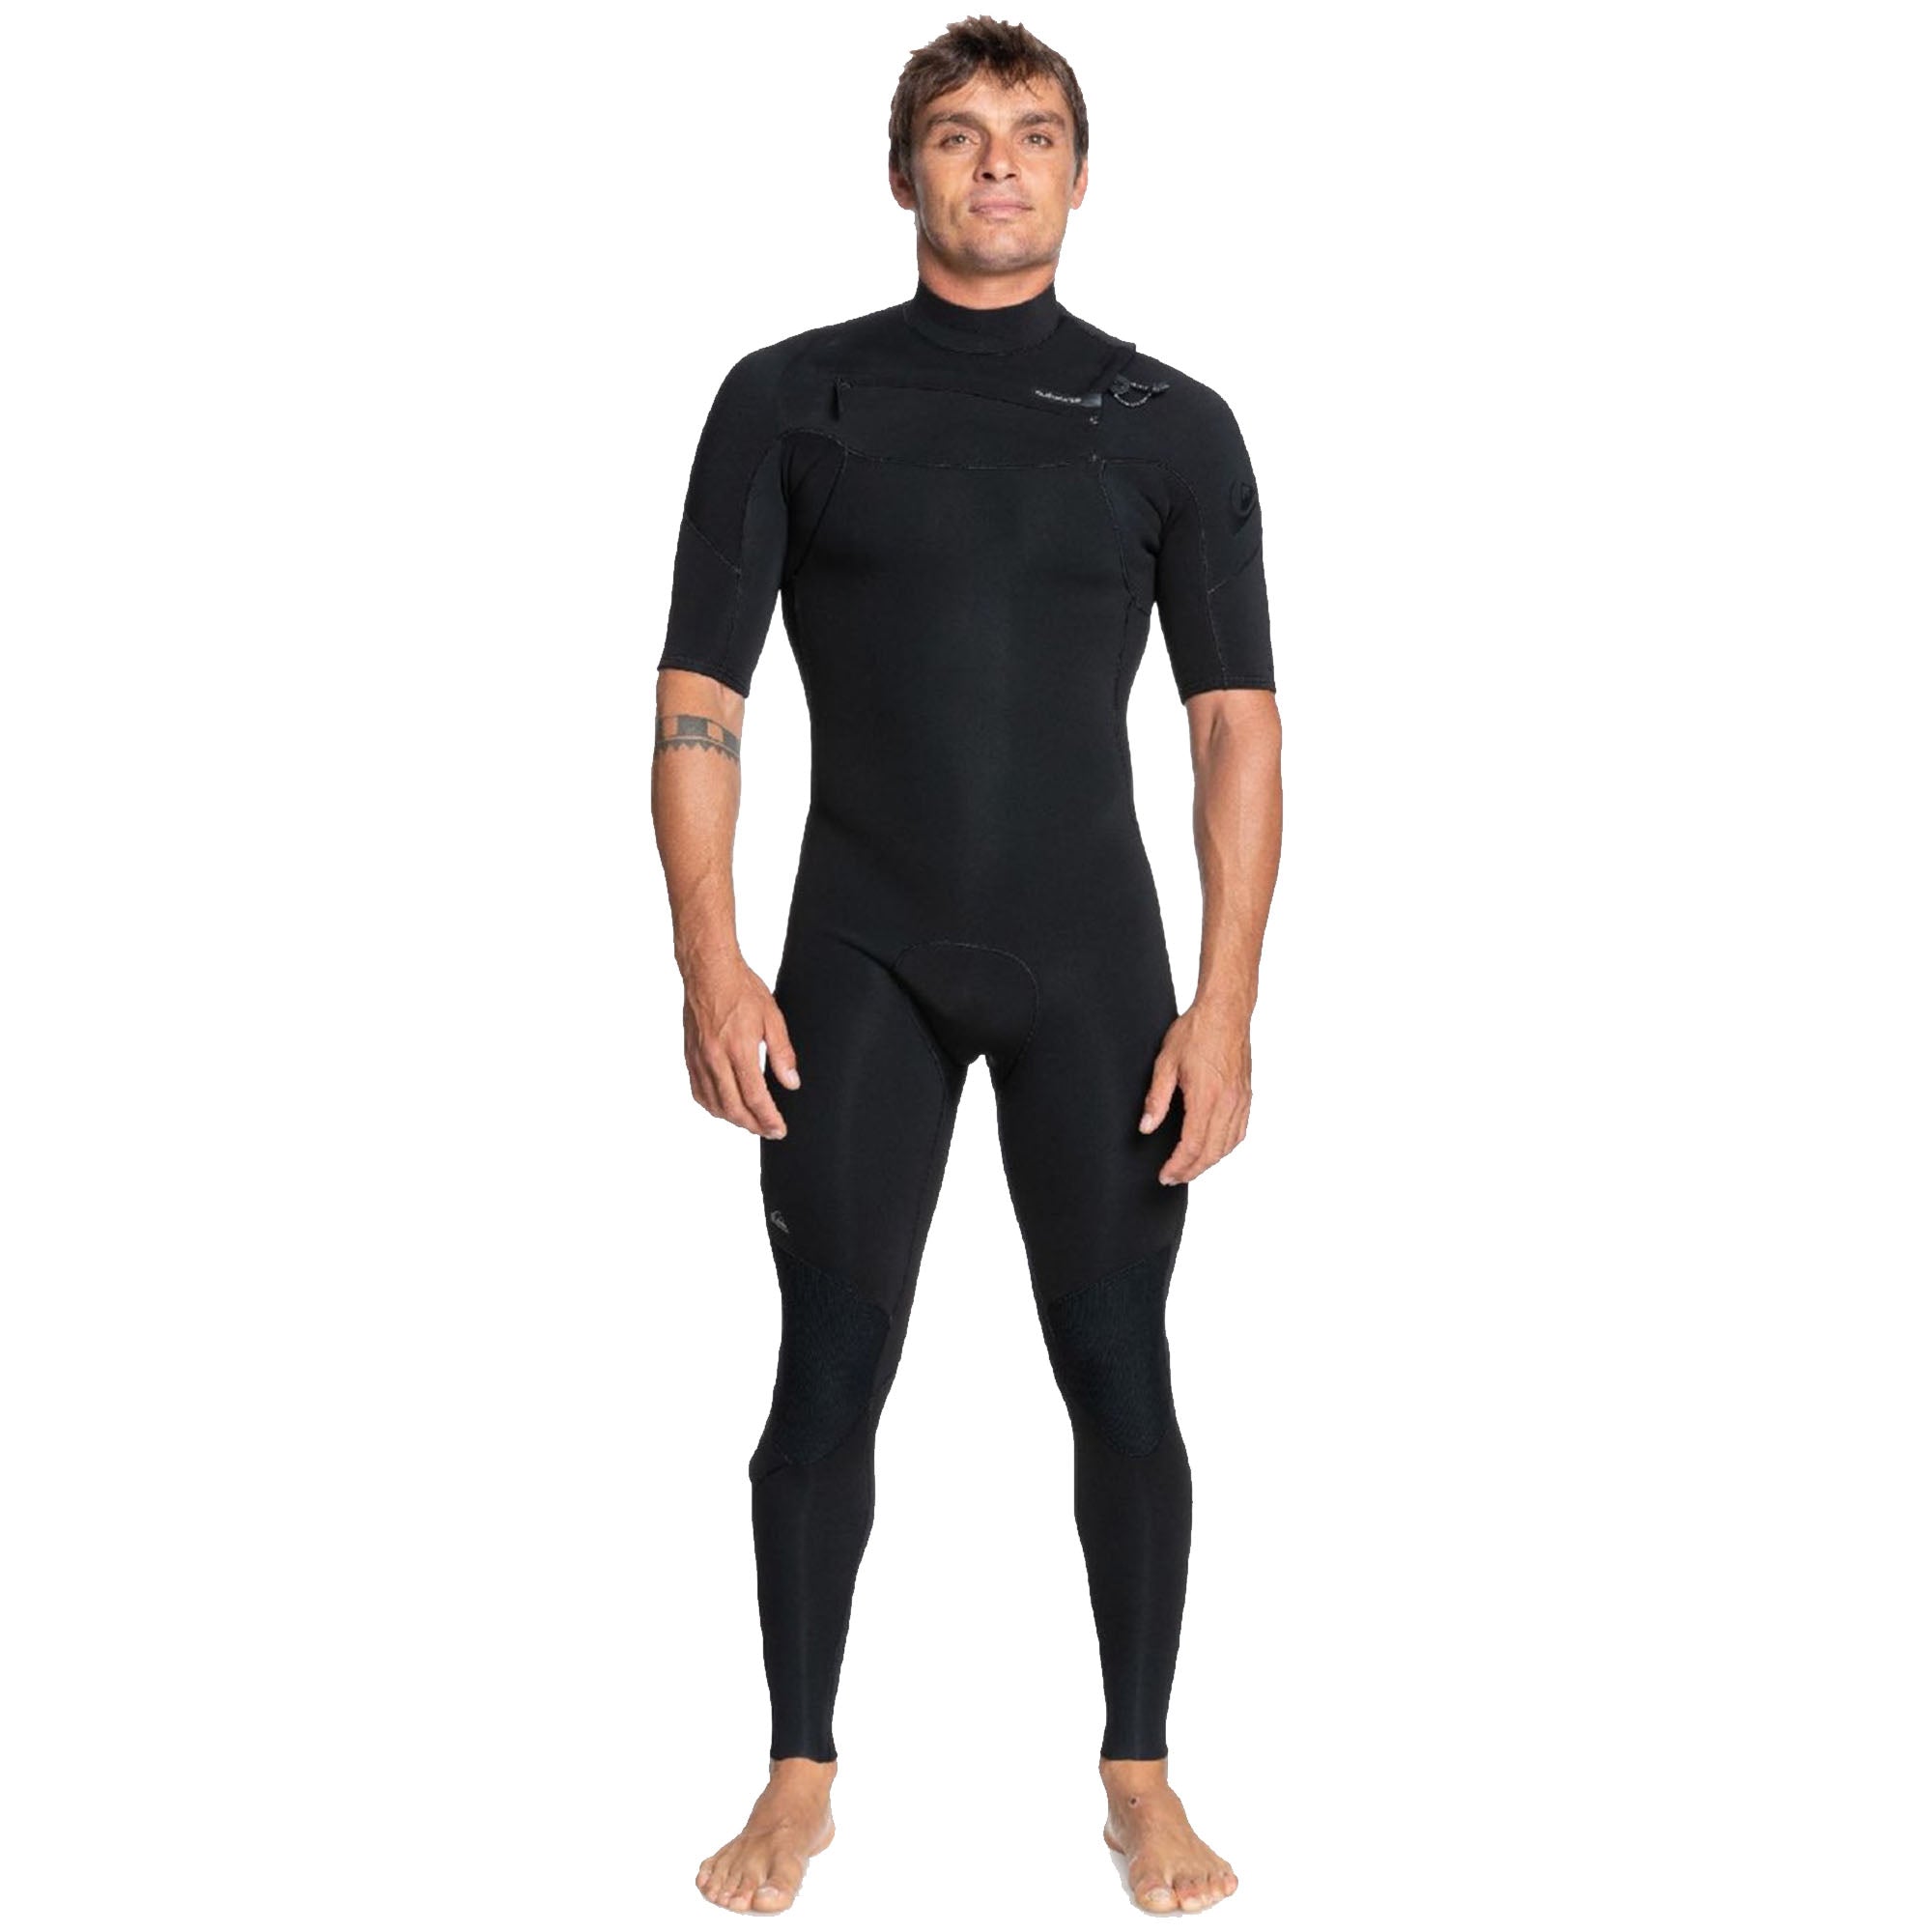 Quiksilver Every Day Sessions 2/2mm Men's S/S Fullsuit